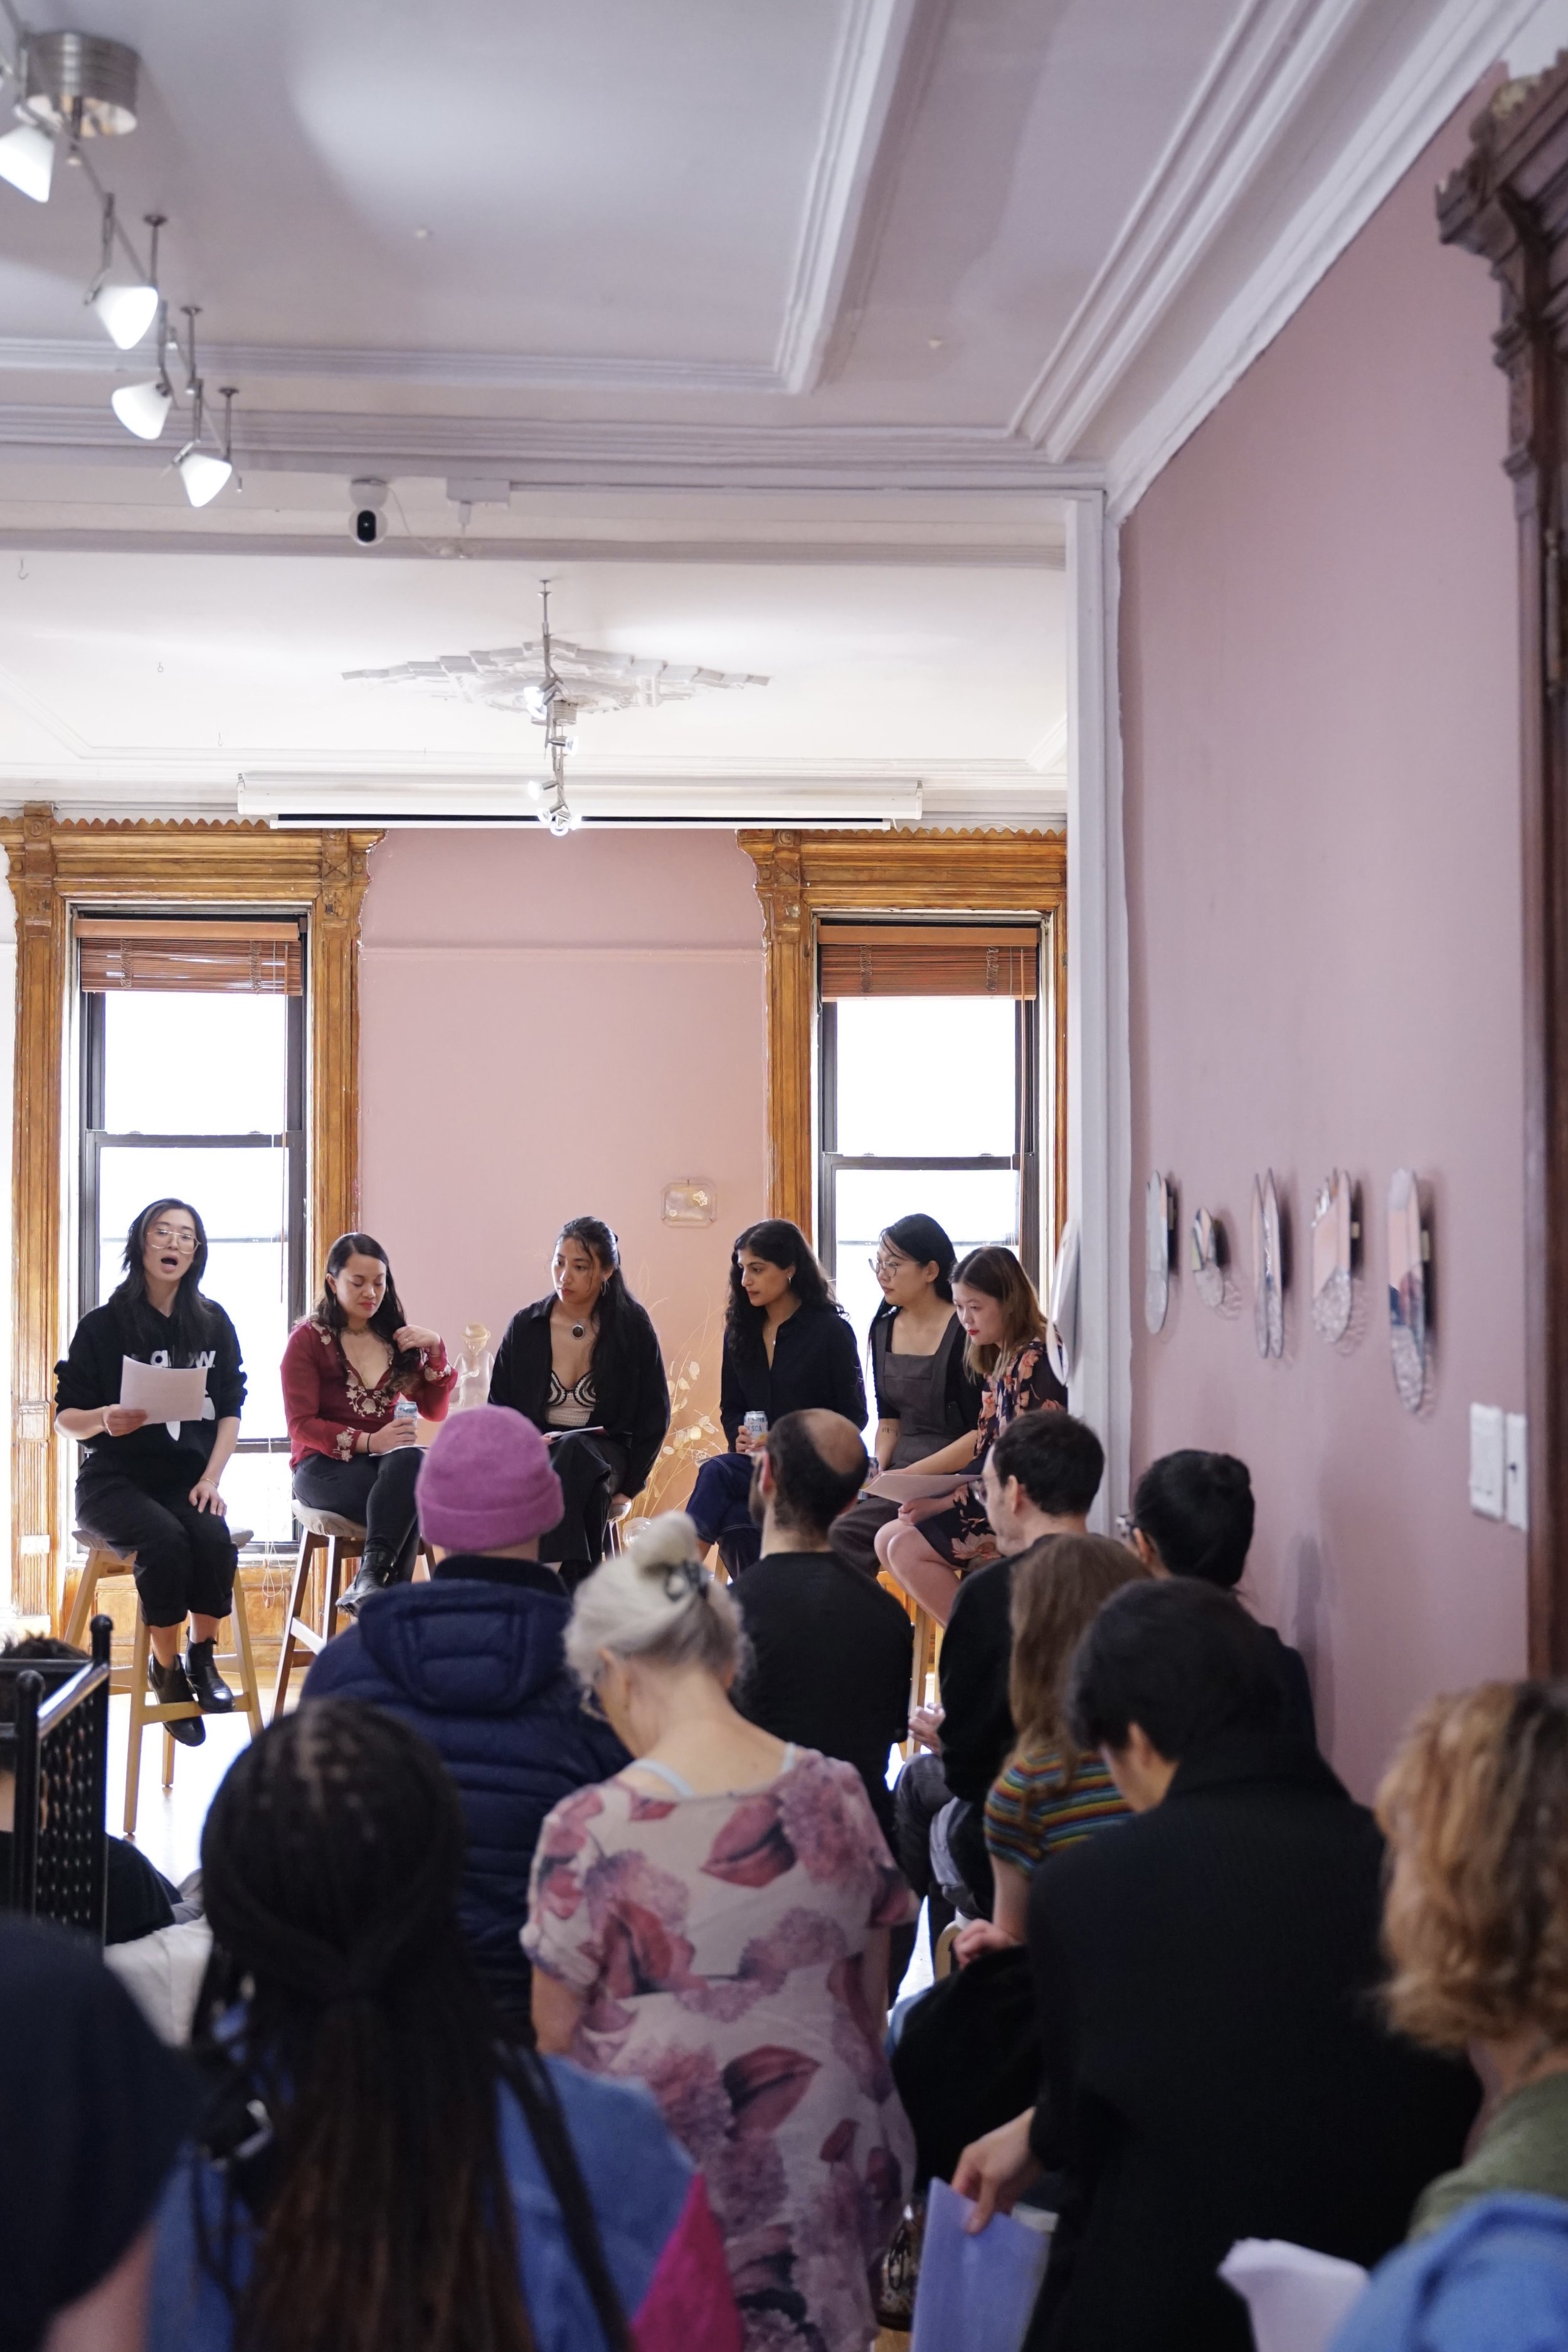  Public Poetry Reading on April 1st, 2023. Photo by Angela Chang, courtesy of Fou Gallery 